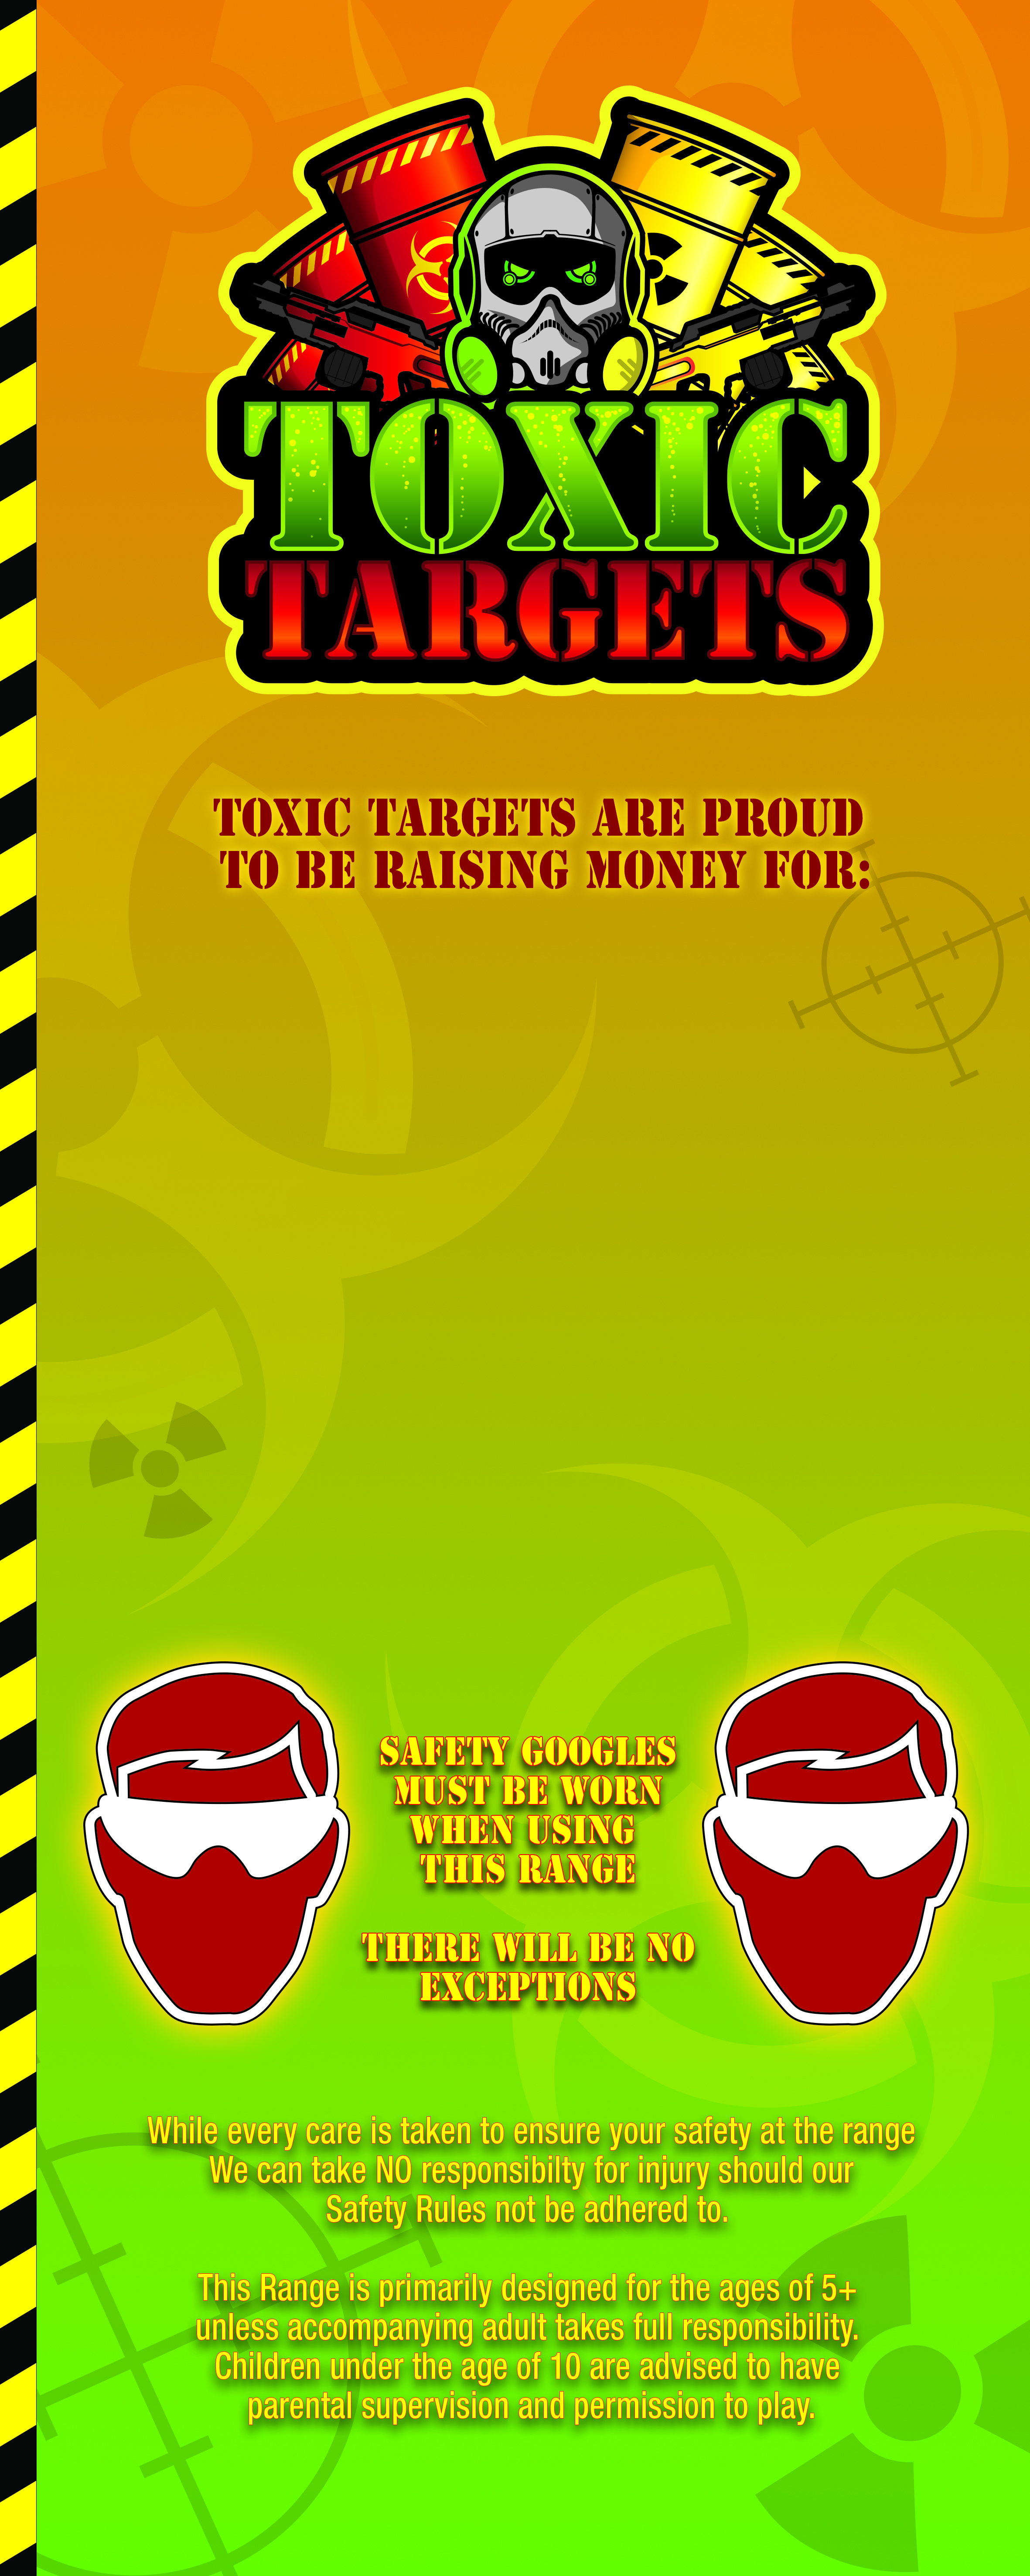 Toxic-Targets-Roller-right-hand-side